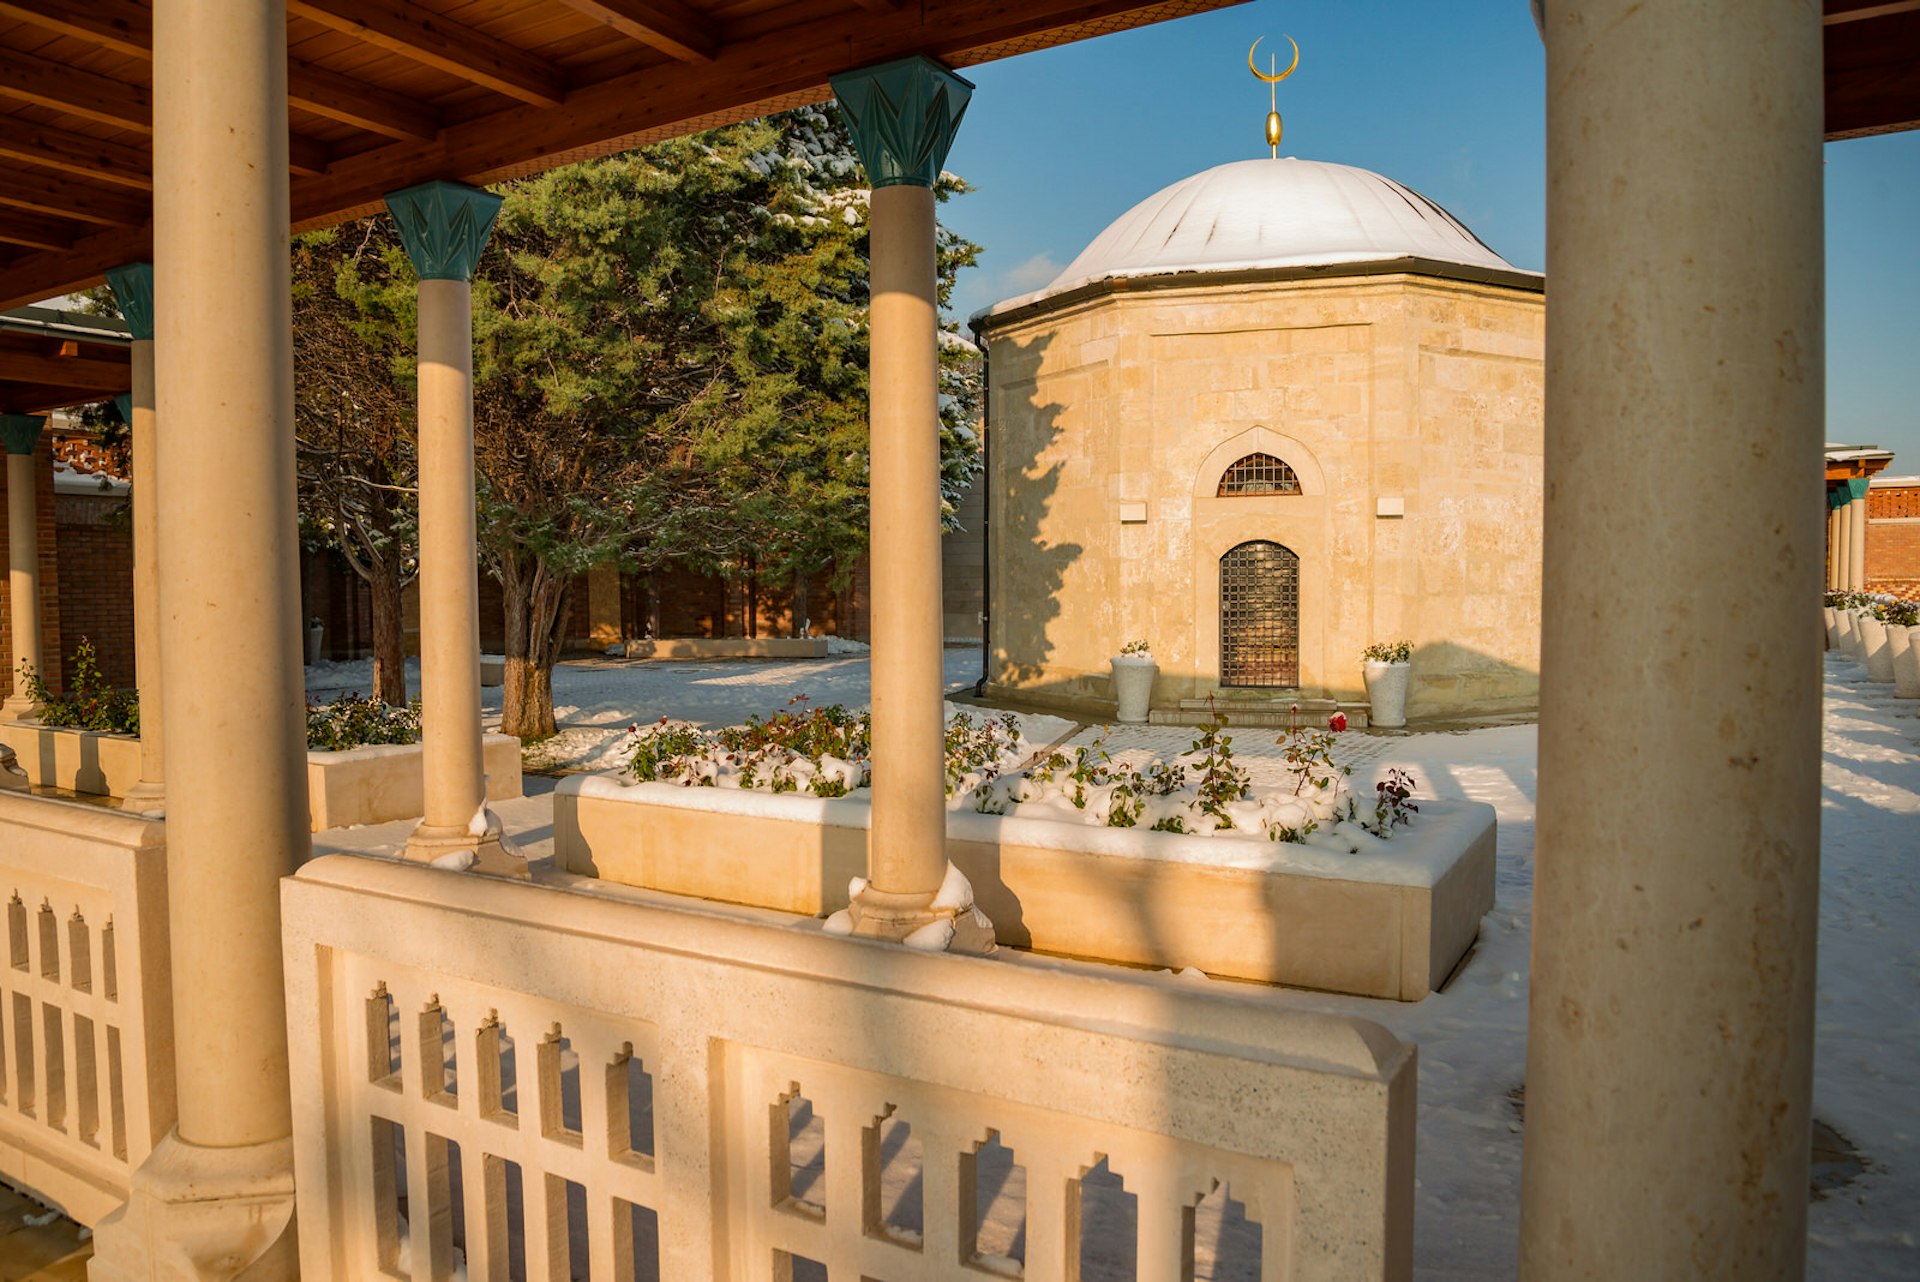 Gül Baba’s Tomb, a small, octagonal building topped by a dome